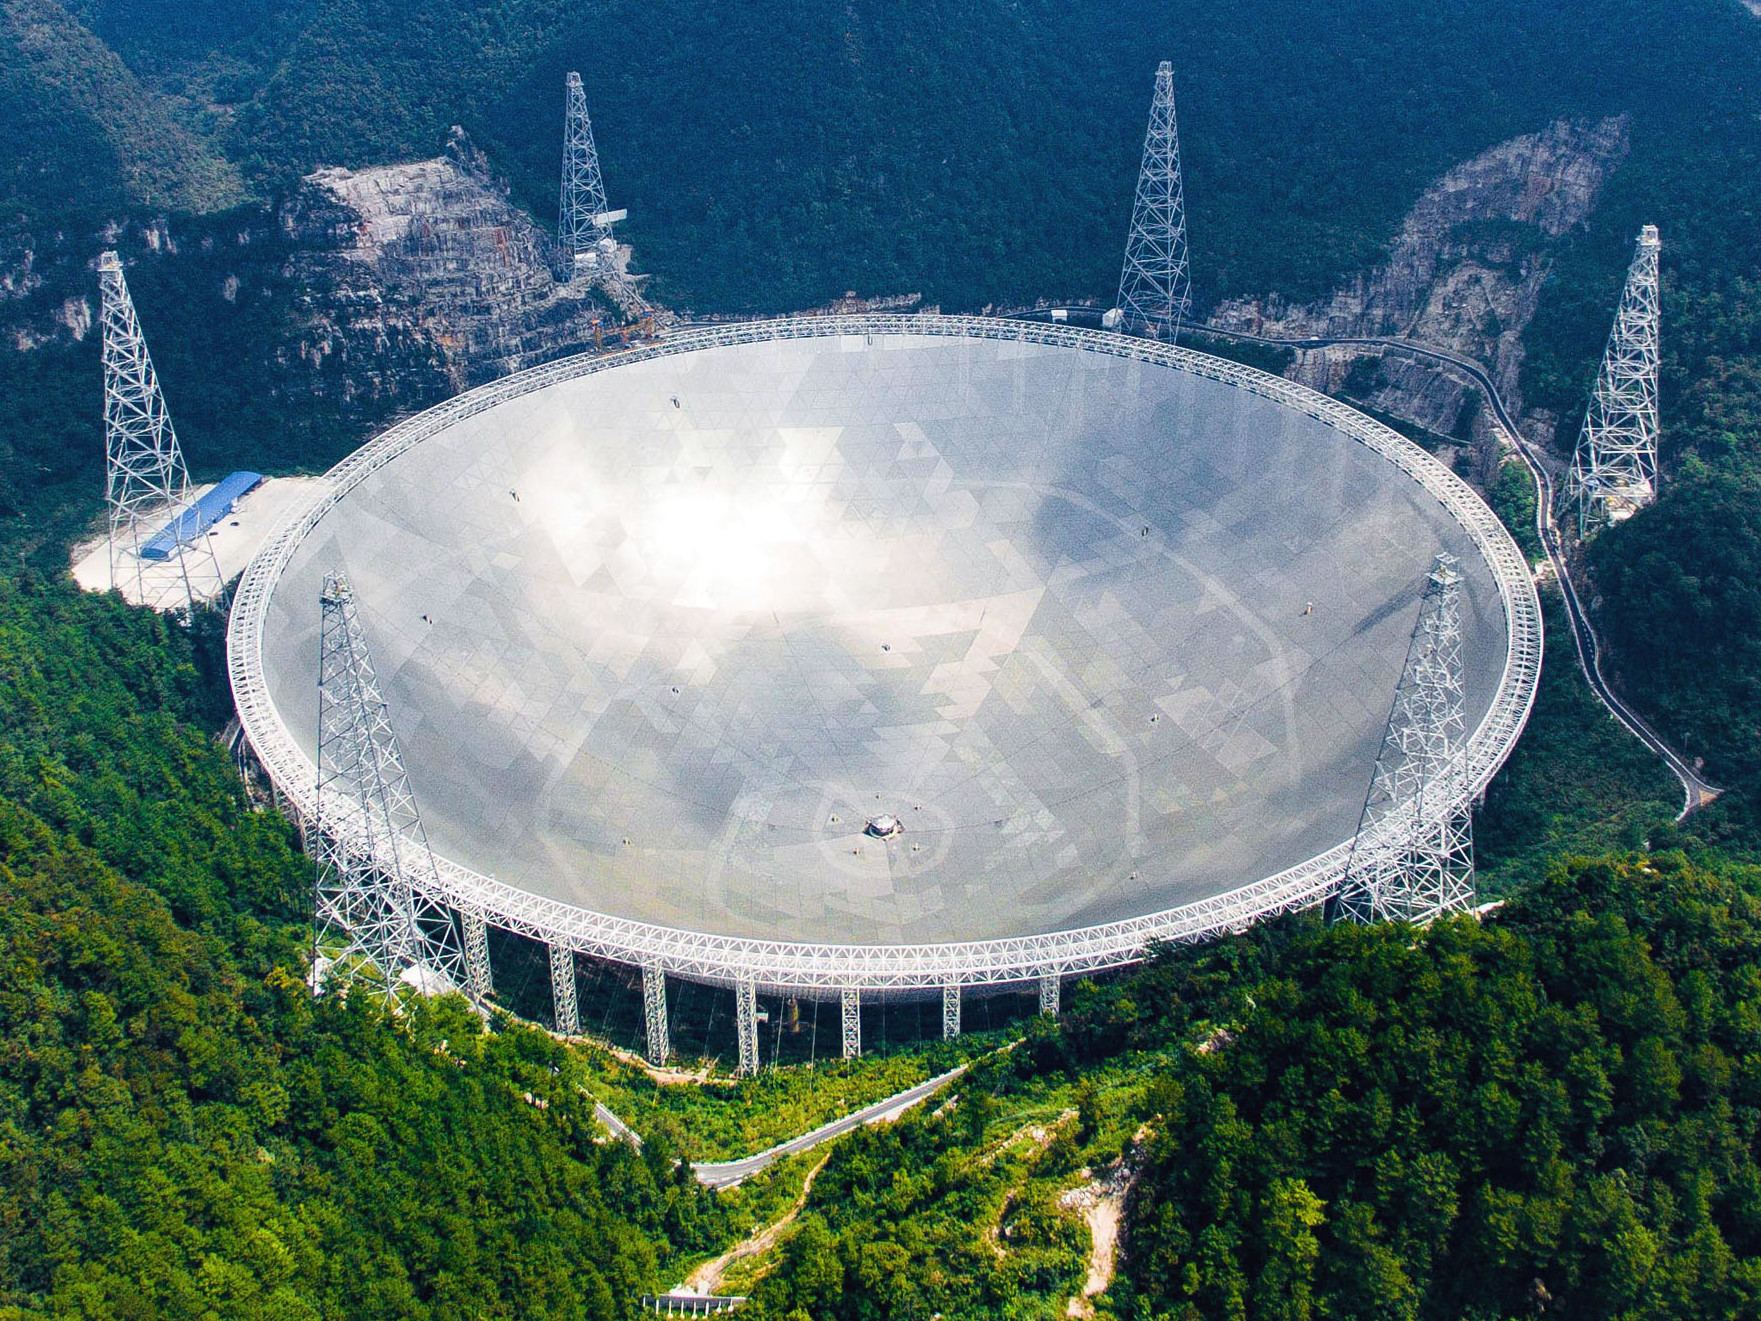 <span style="font-size:16px;position:relative;top:-60px">[Astronomy Now](https://astronomynow.com/2016/09/26/australian-technology-runs-worlds-largest-single-dish-radio-telescope-in-china/)